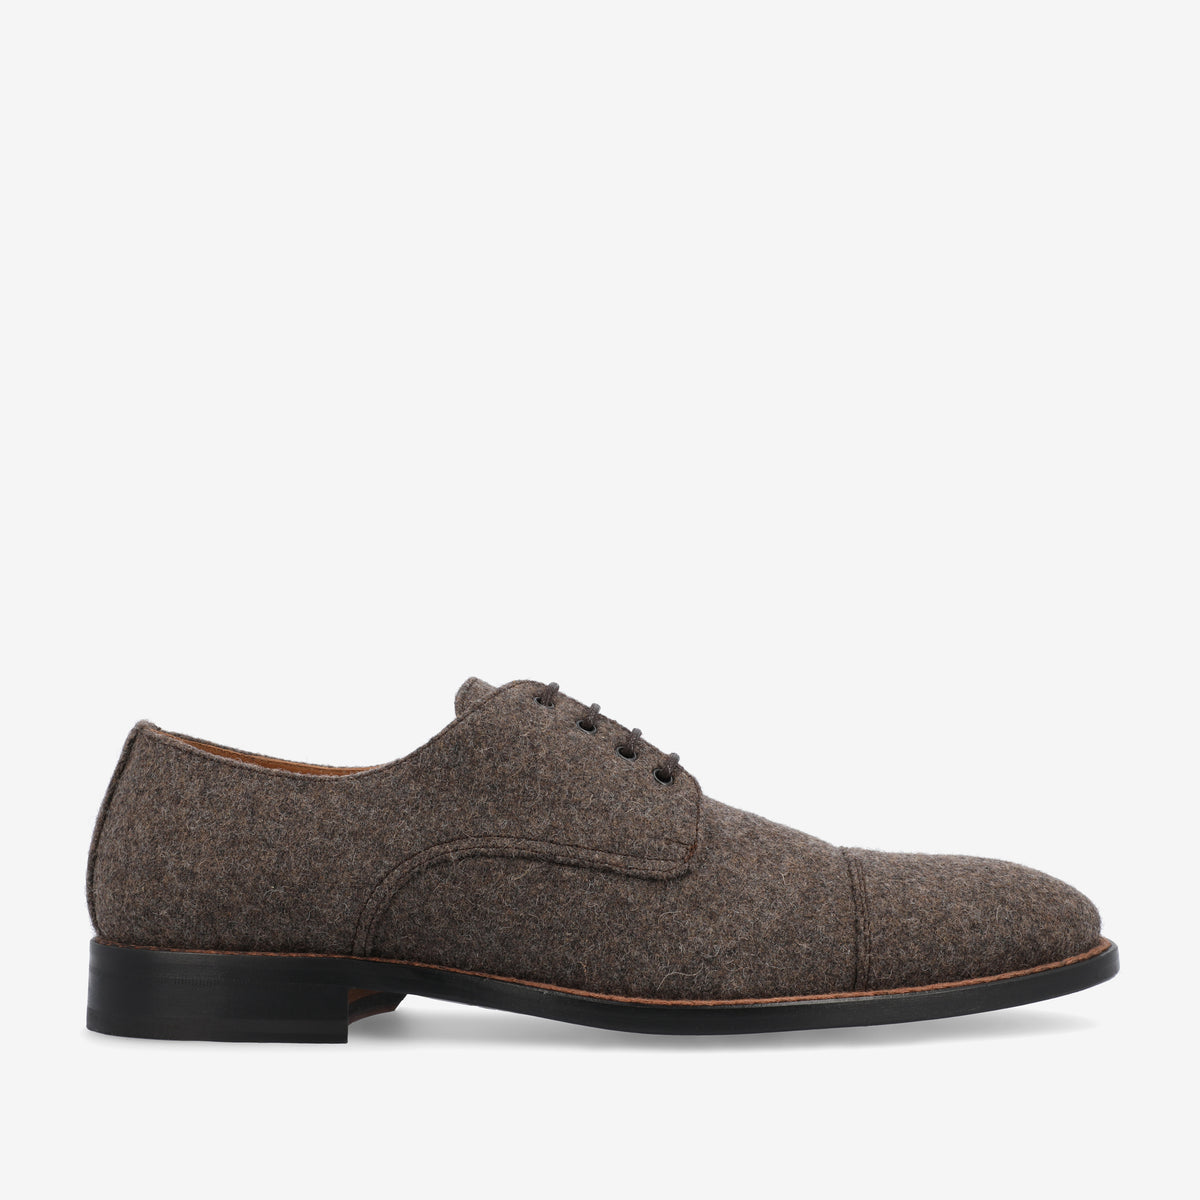 The Kennedy Shoe in Brown